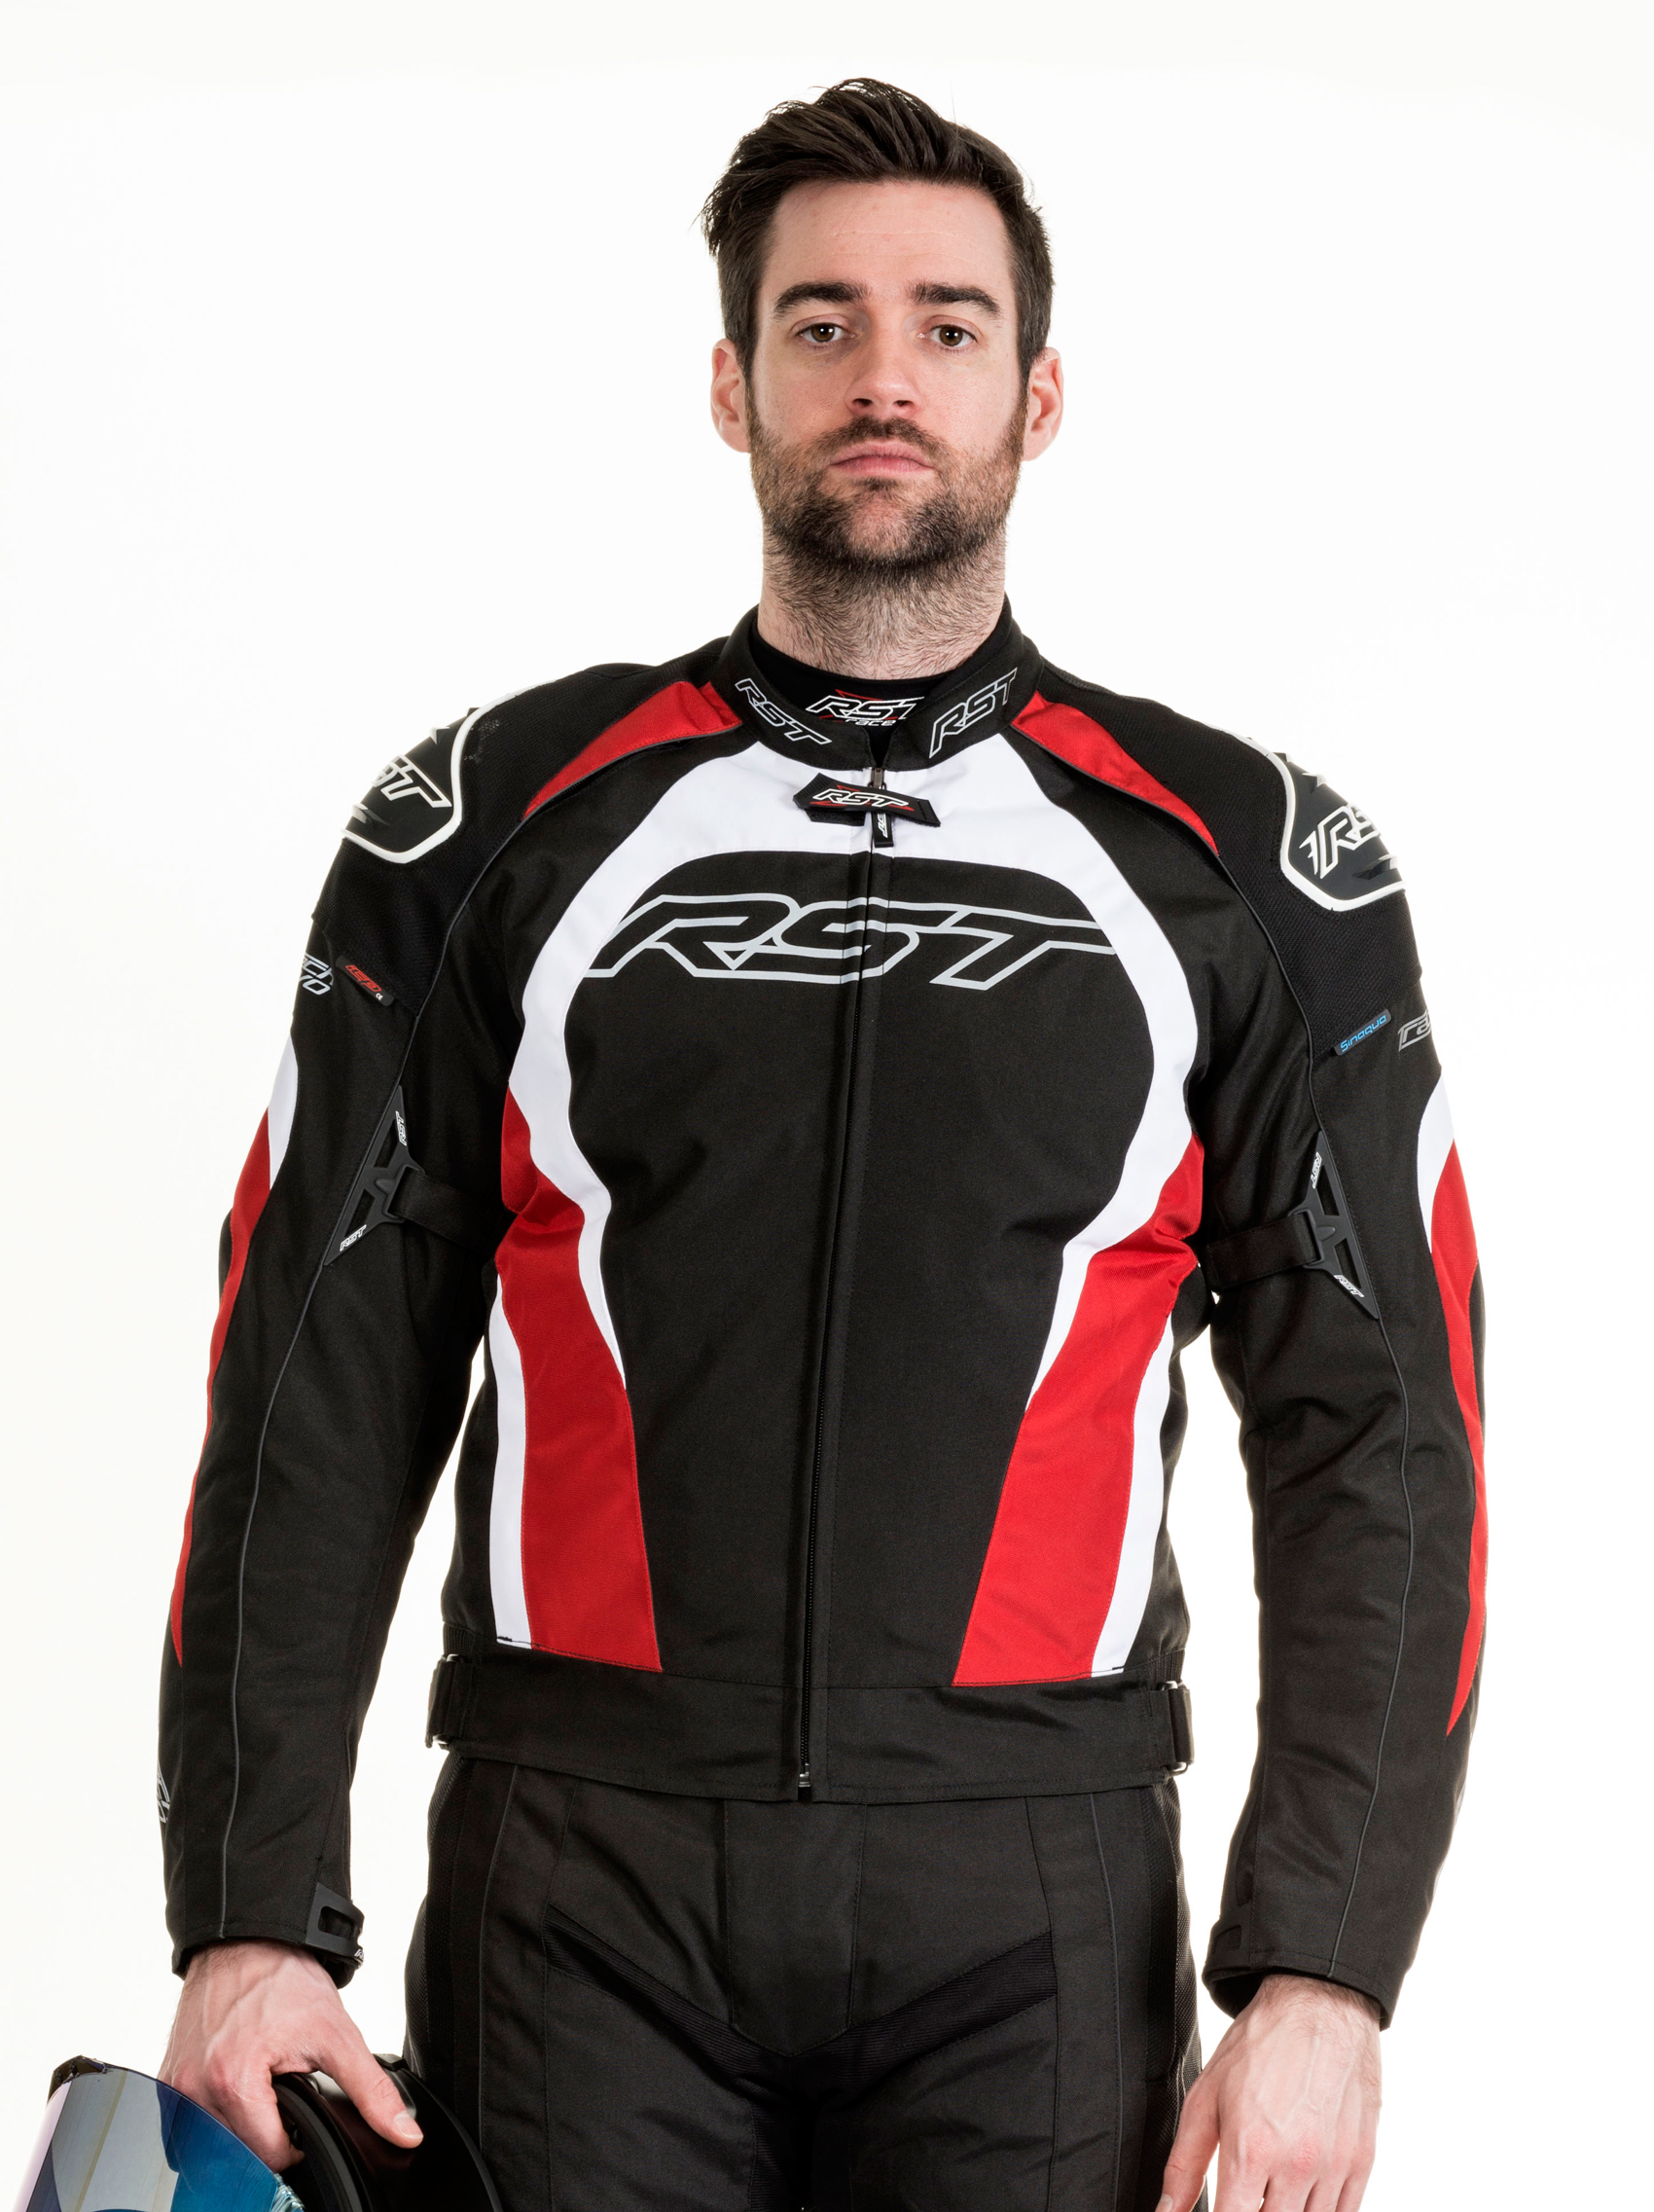 Best Motorcycle Jackets for Summer: The Top 5